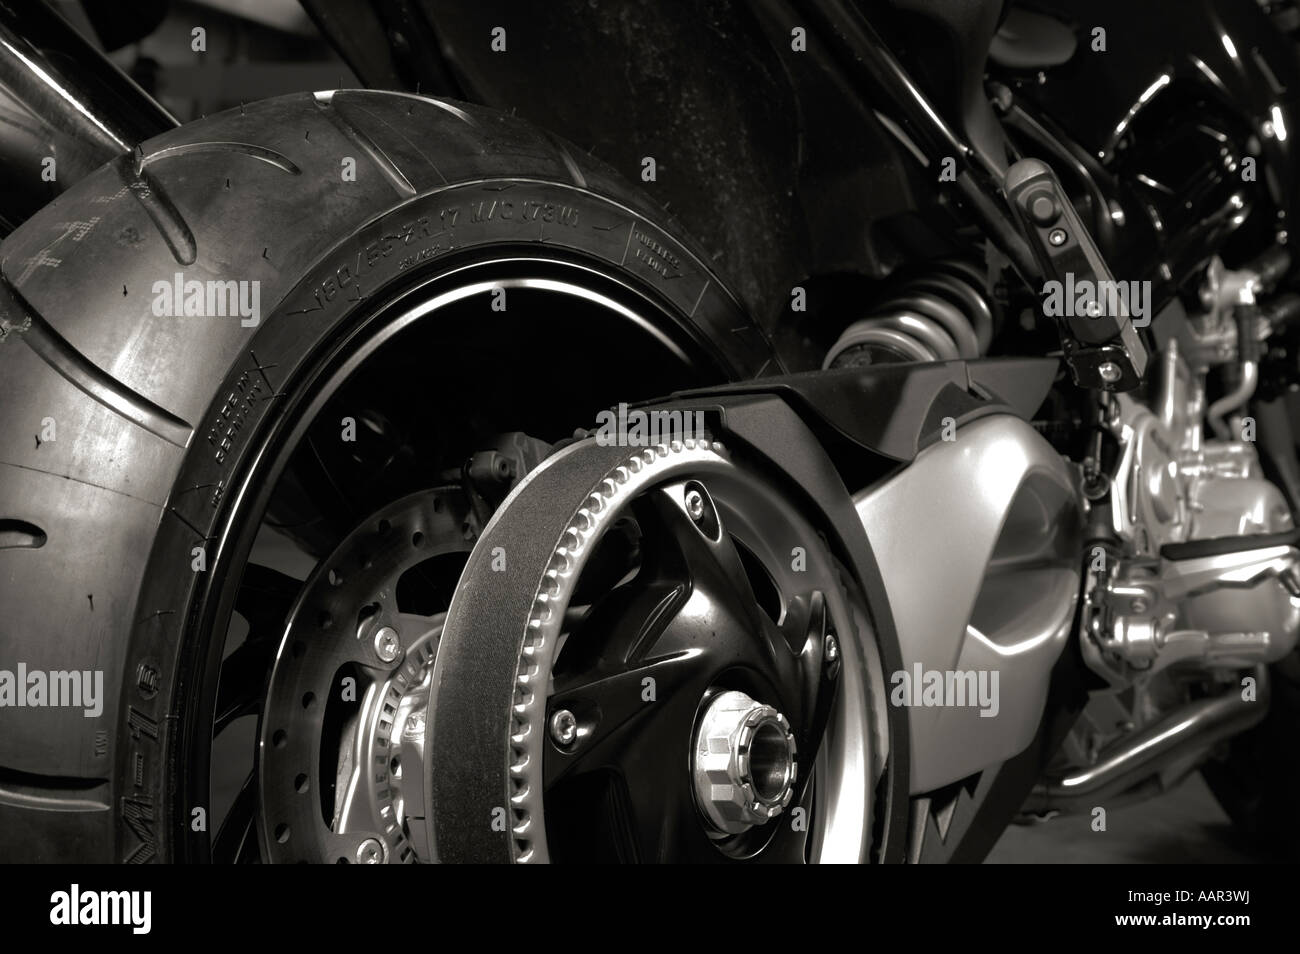 Motorcycle wheel and a gear with belt Motorbike bike Stock Photo